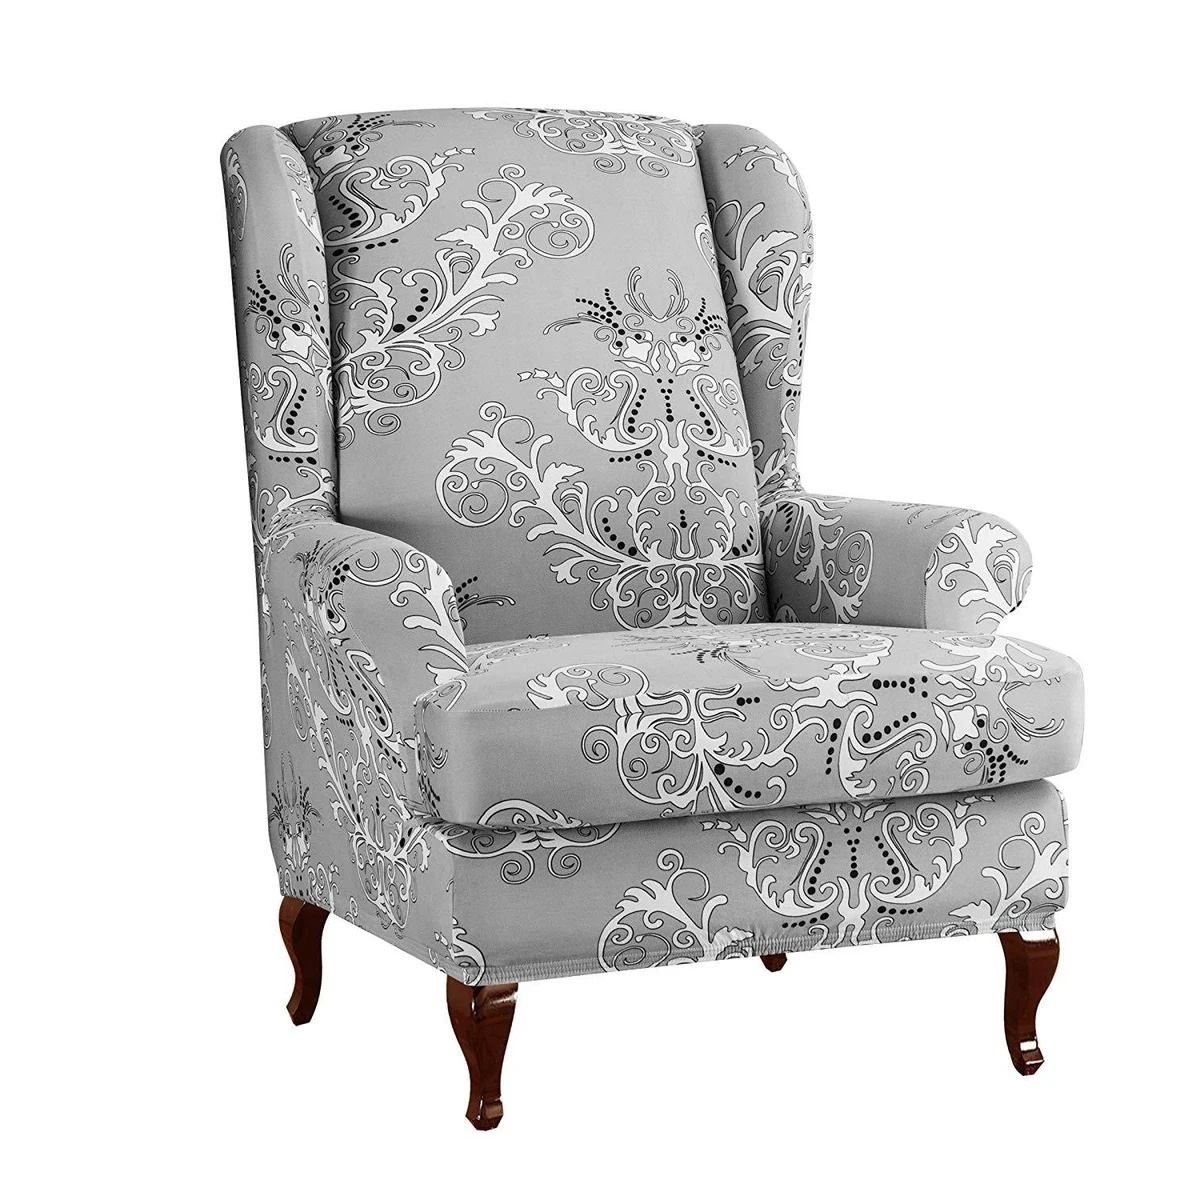 Facai 2pcs/Set Wingback Chair Covers Spandex Elastic Wing Armchair Slipcovers Floral Print Stretch Sofa Slipcover Furniture Protector Washable for Living Room #10 